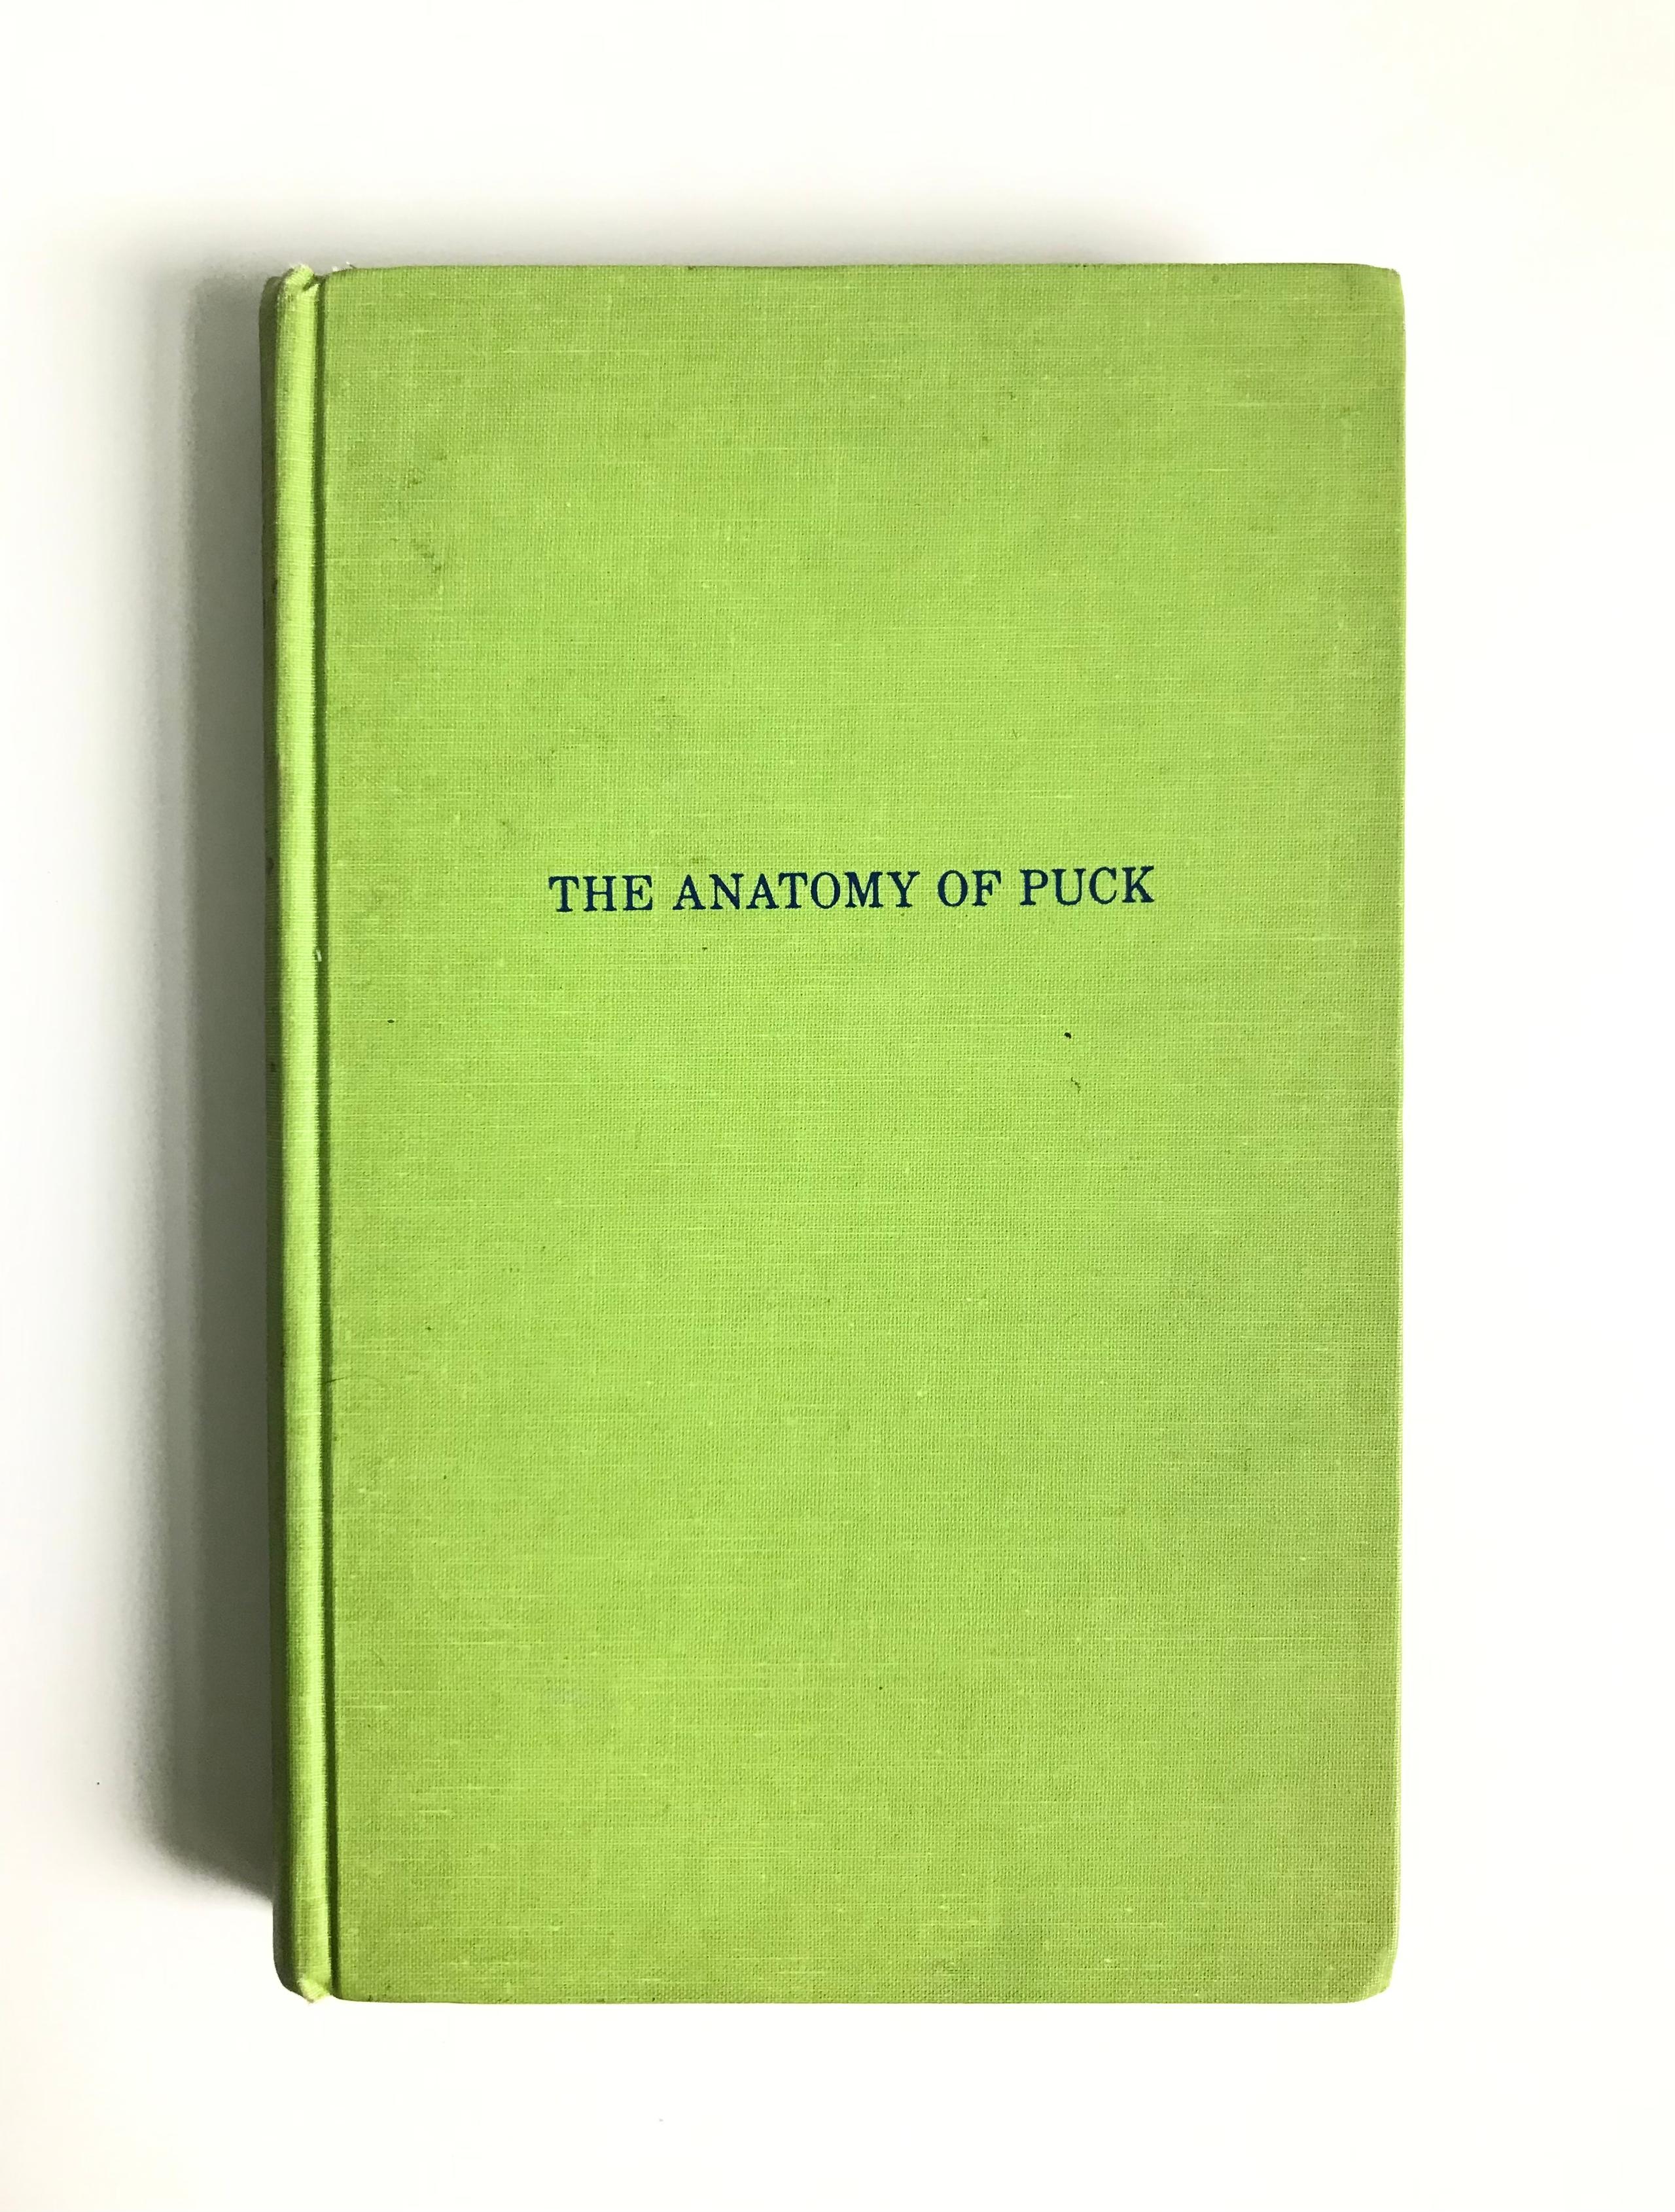 The Anatomy of Puck by Katharine Mary Briggs